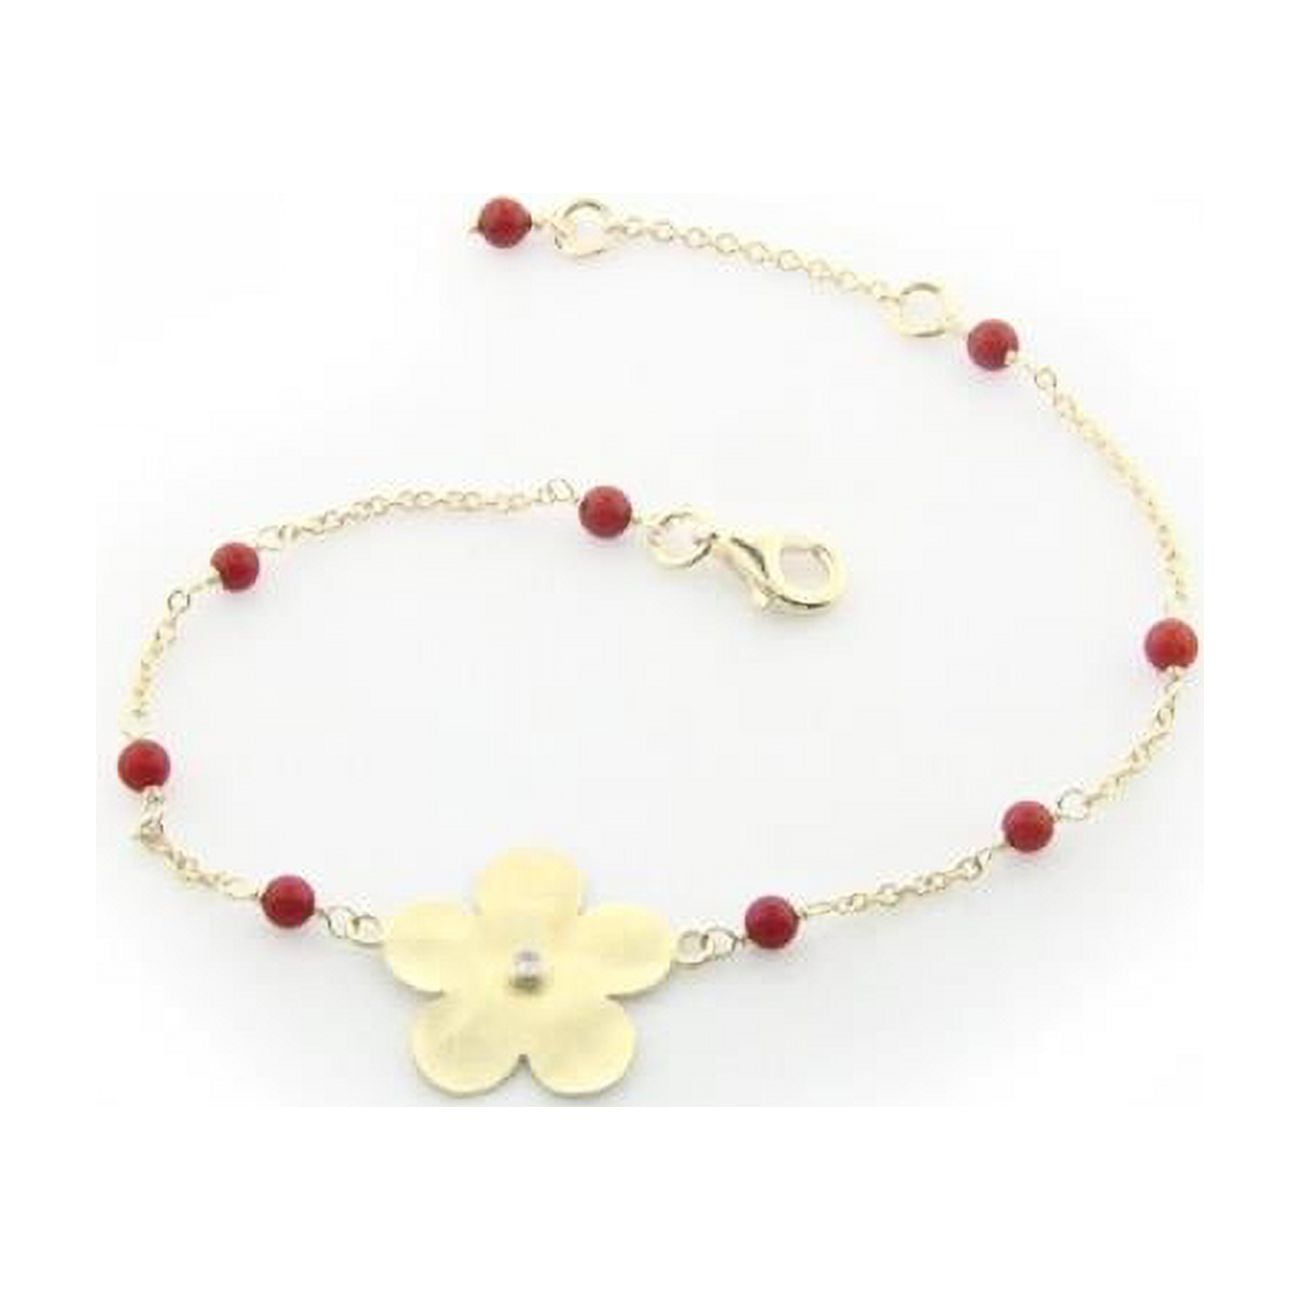 212216c 7 In. Hammered Gold Plated Sterling Silver Flower Of Life & Coral Beads Chain Bracelet